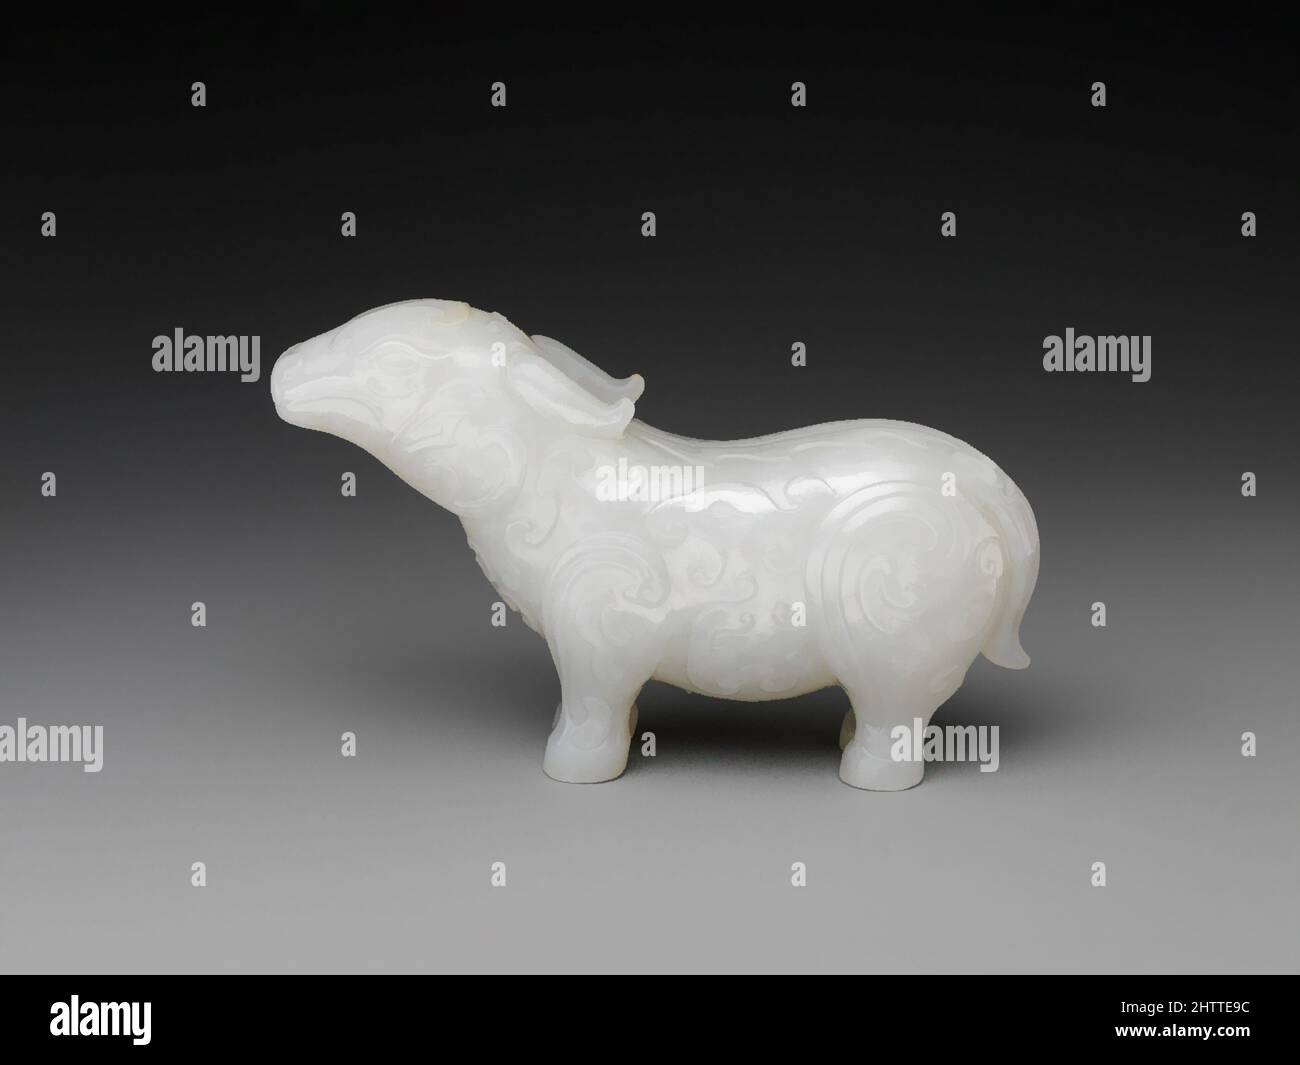 Art inspired by Fantastic animal, Qing dynasty (1644–1911), 18th century, China, Jade (nephrite), H. 2 in. (5.1 cm); W. 3 3/8 in. (8.6 cm), Jade, The form of this tapir-like animal and the abstract curvilinear patterns on its body can both be traced to vessels produced during China’s, Classic works modernized by Artotop with a splash of modernity. Shapes, color and value, eye-catching visual impact on art. Emotions through freedom of artworks in a contemporary way. A timeless message pursuing a wildly creative new direction. Artists turning to the digital medium and creating the Artotop NFT Stock Photo